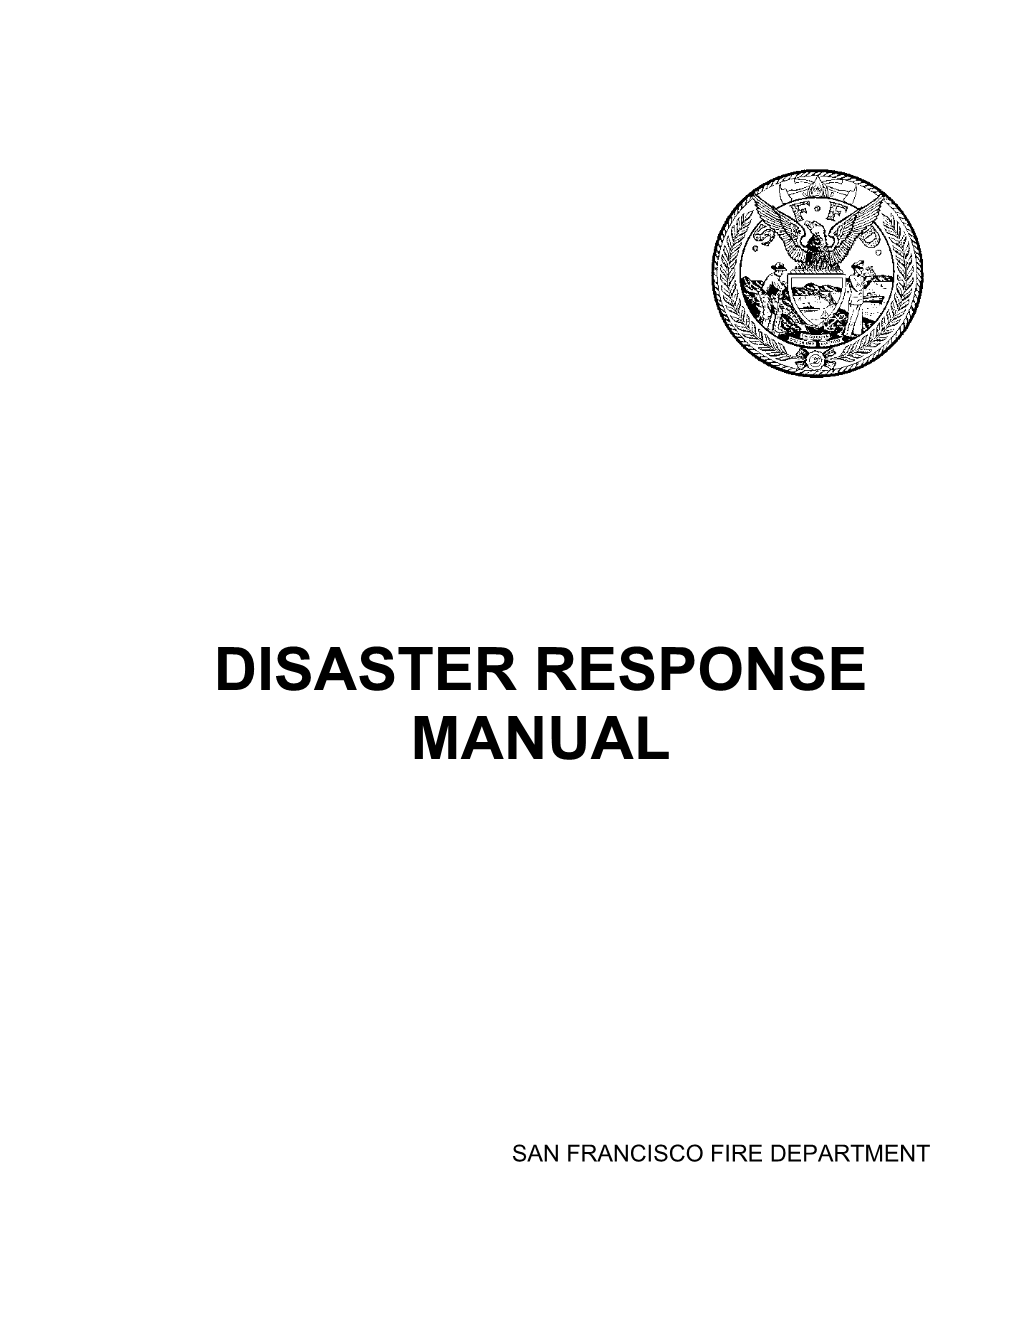 Disaster Operations Manual Assistant Deputy Chief Kyle Merkins